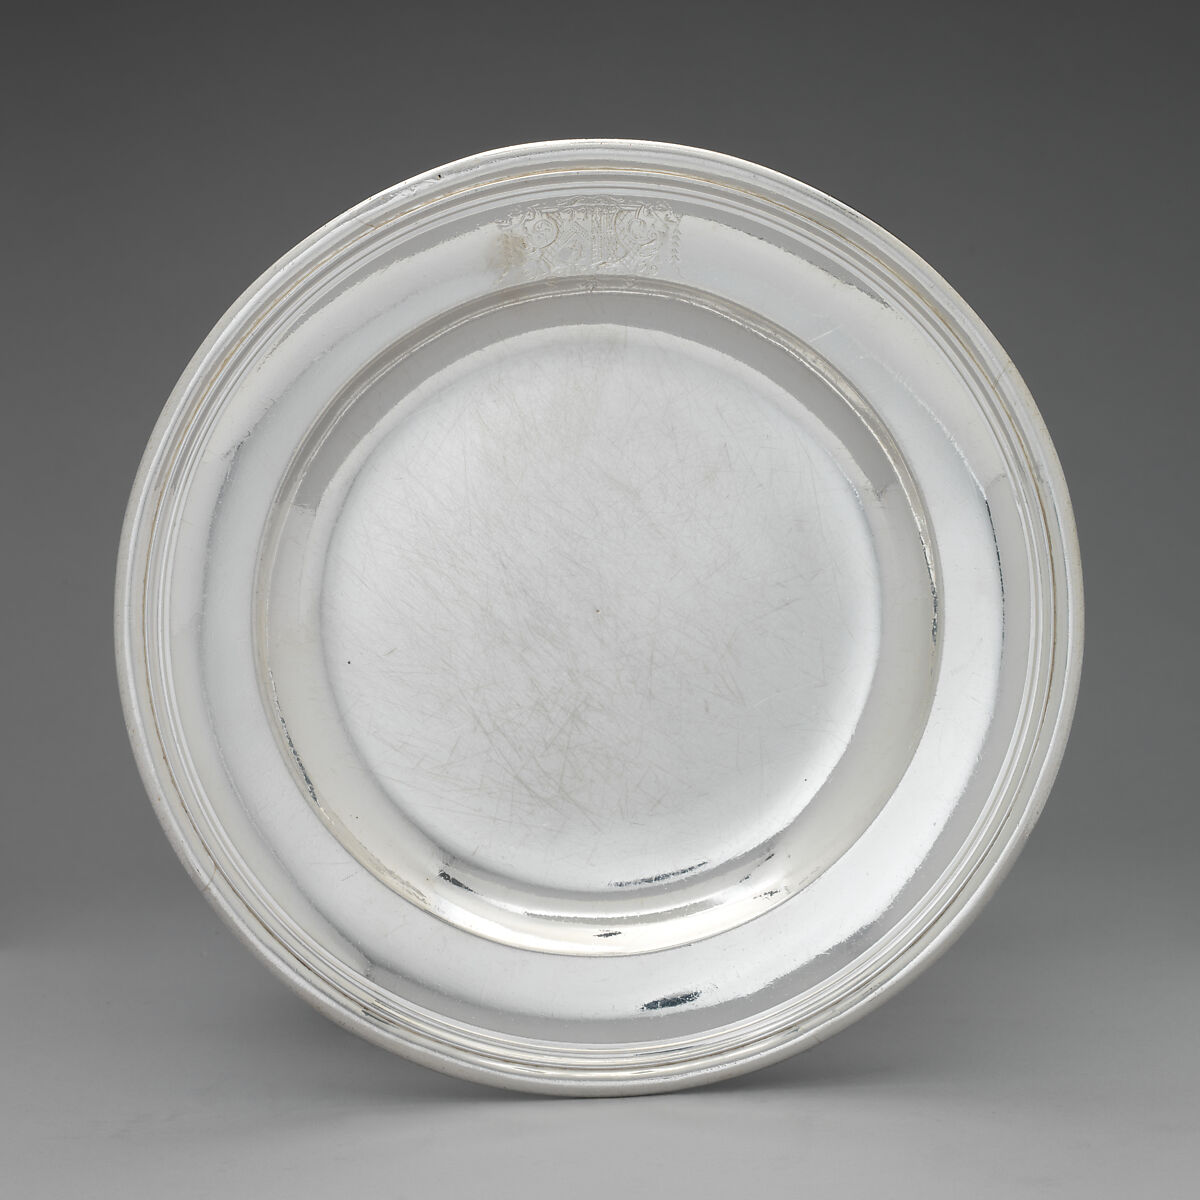 Plate (one of a set of twelve), Thomas Farren (British, active ca. 1707–d. 1743), Silver, British, London 